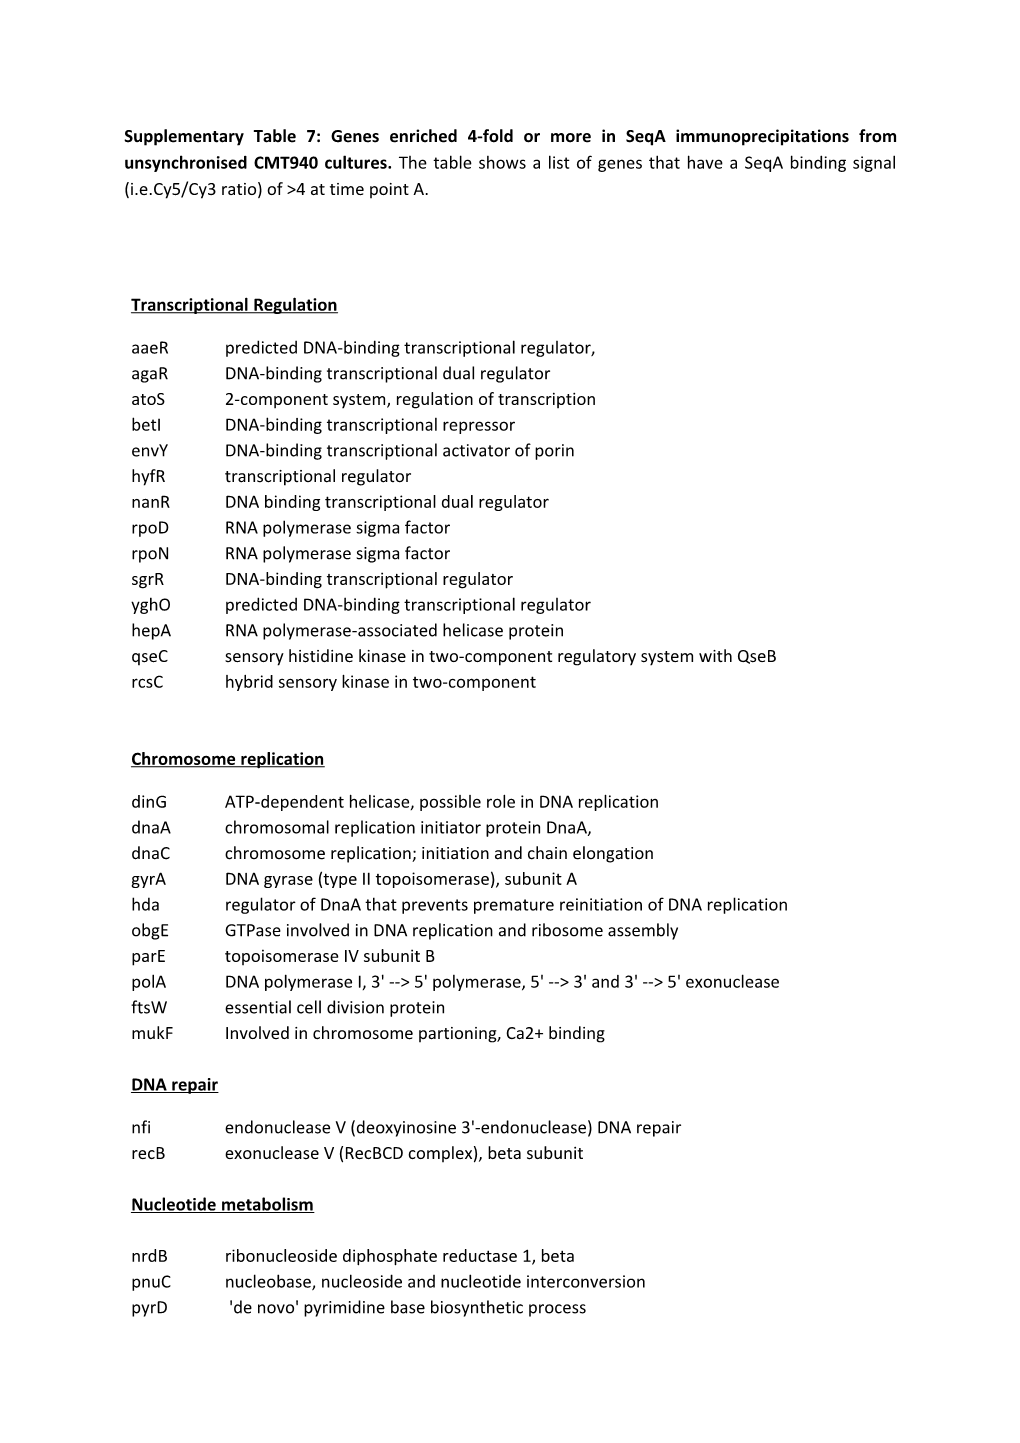 Supplementary Table 7:Genes Enriched 4-Fold Or More in Seqa Immunoprecipitations From